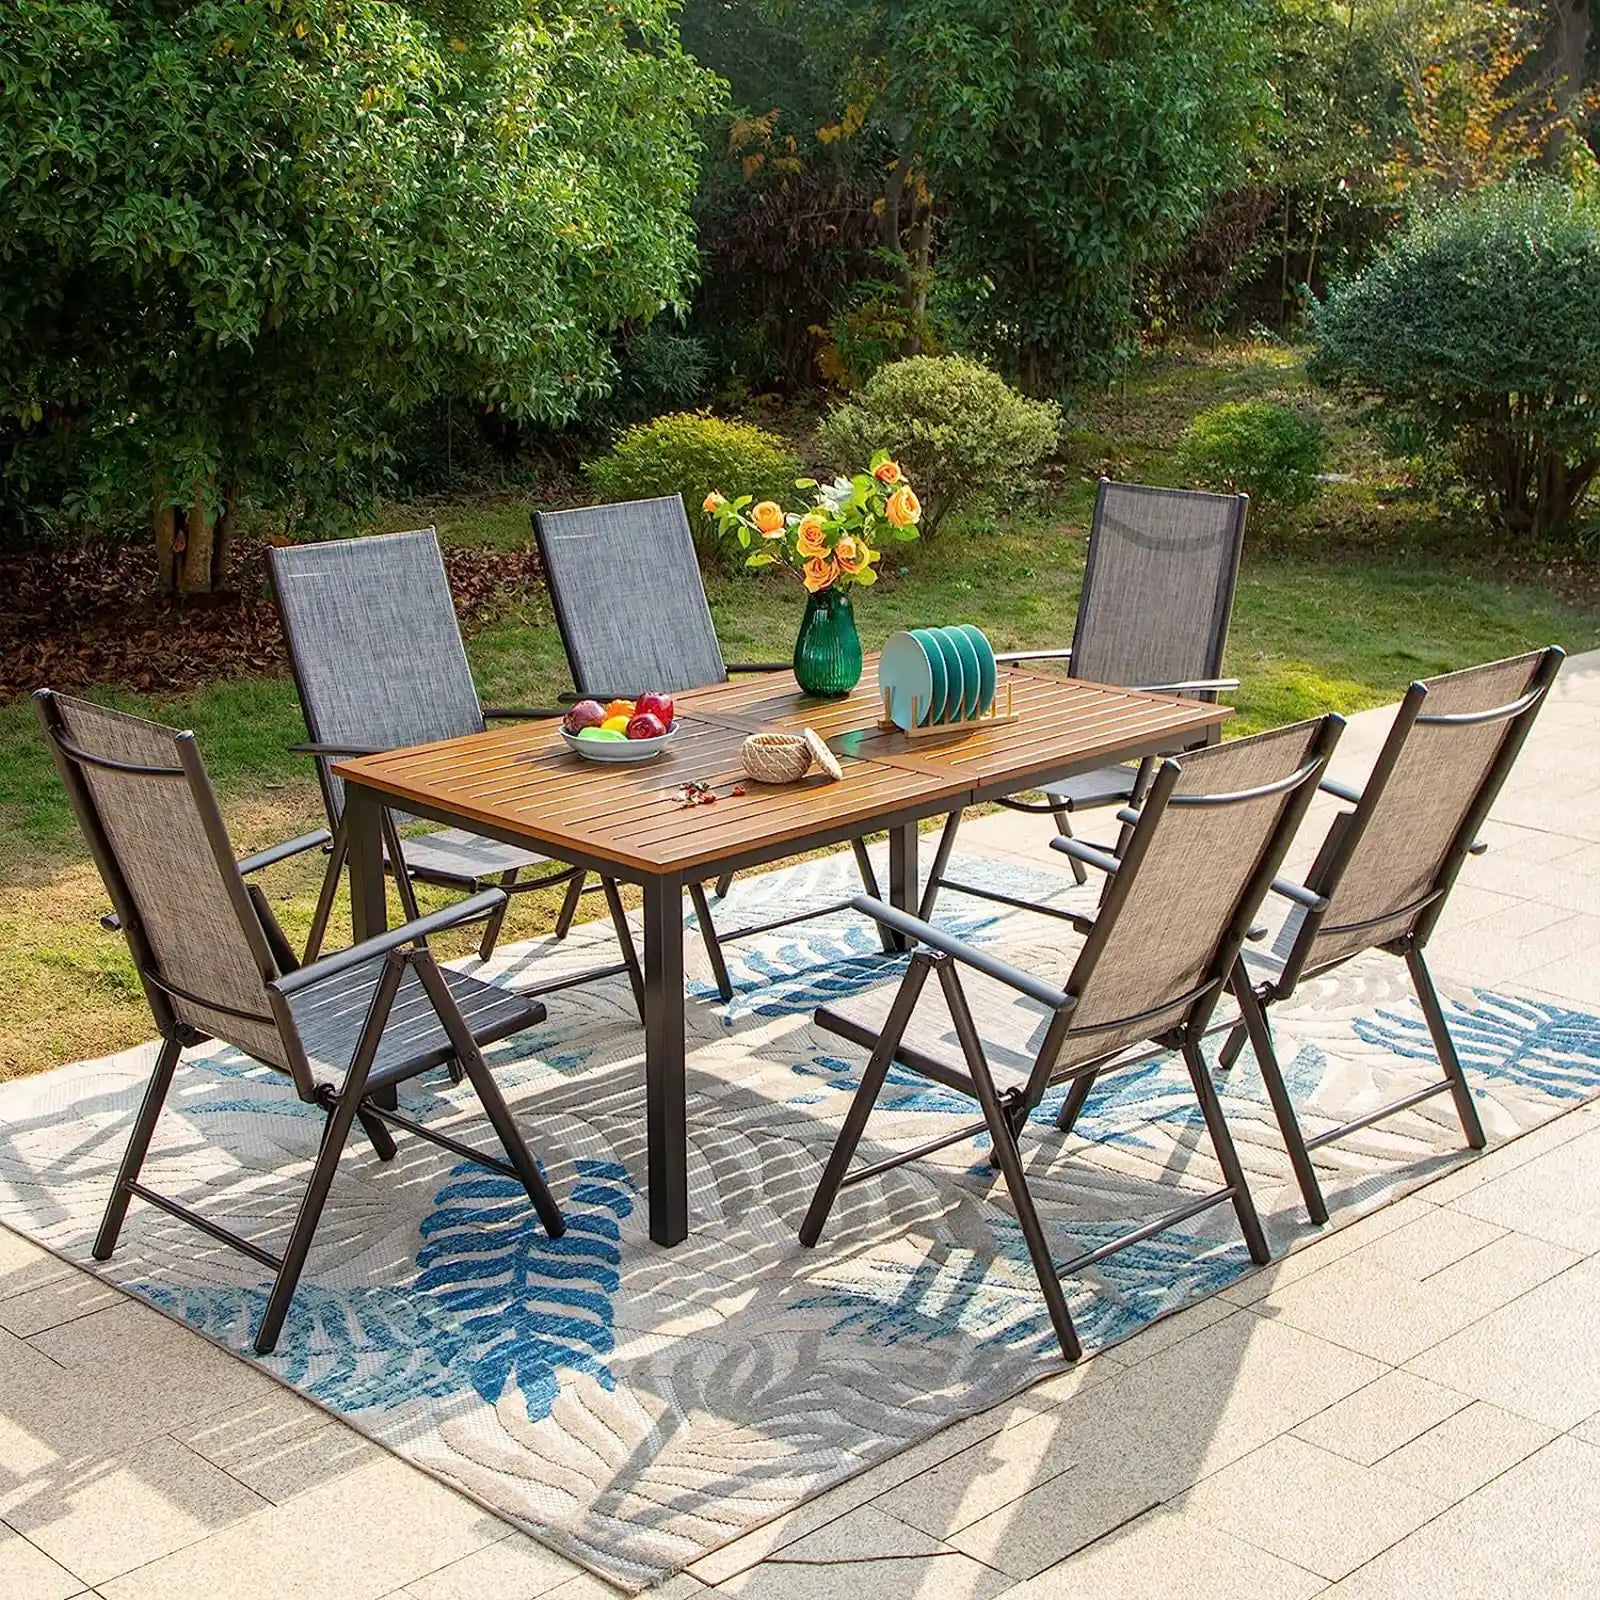 Metal Rectangular Outdoor Dining Table for 6 Person